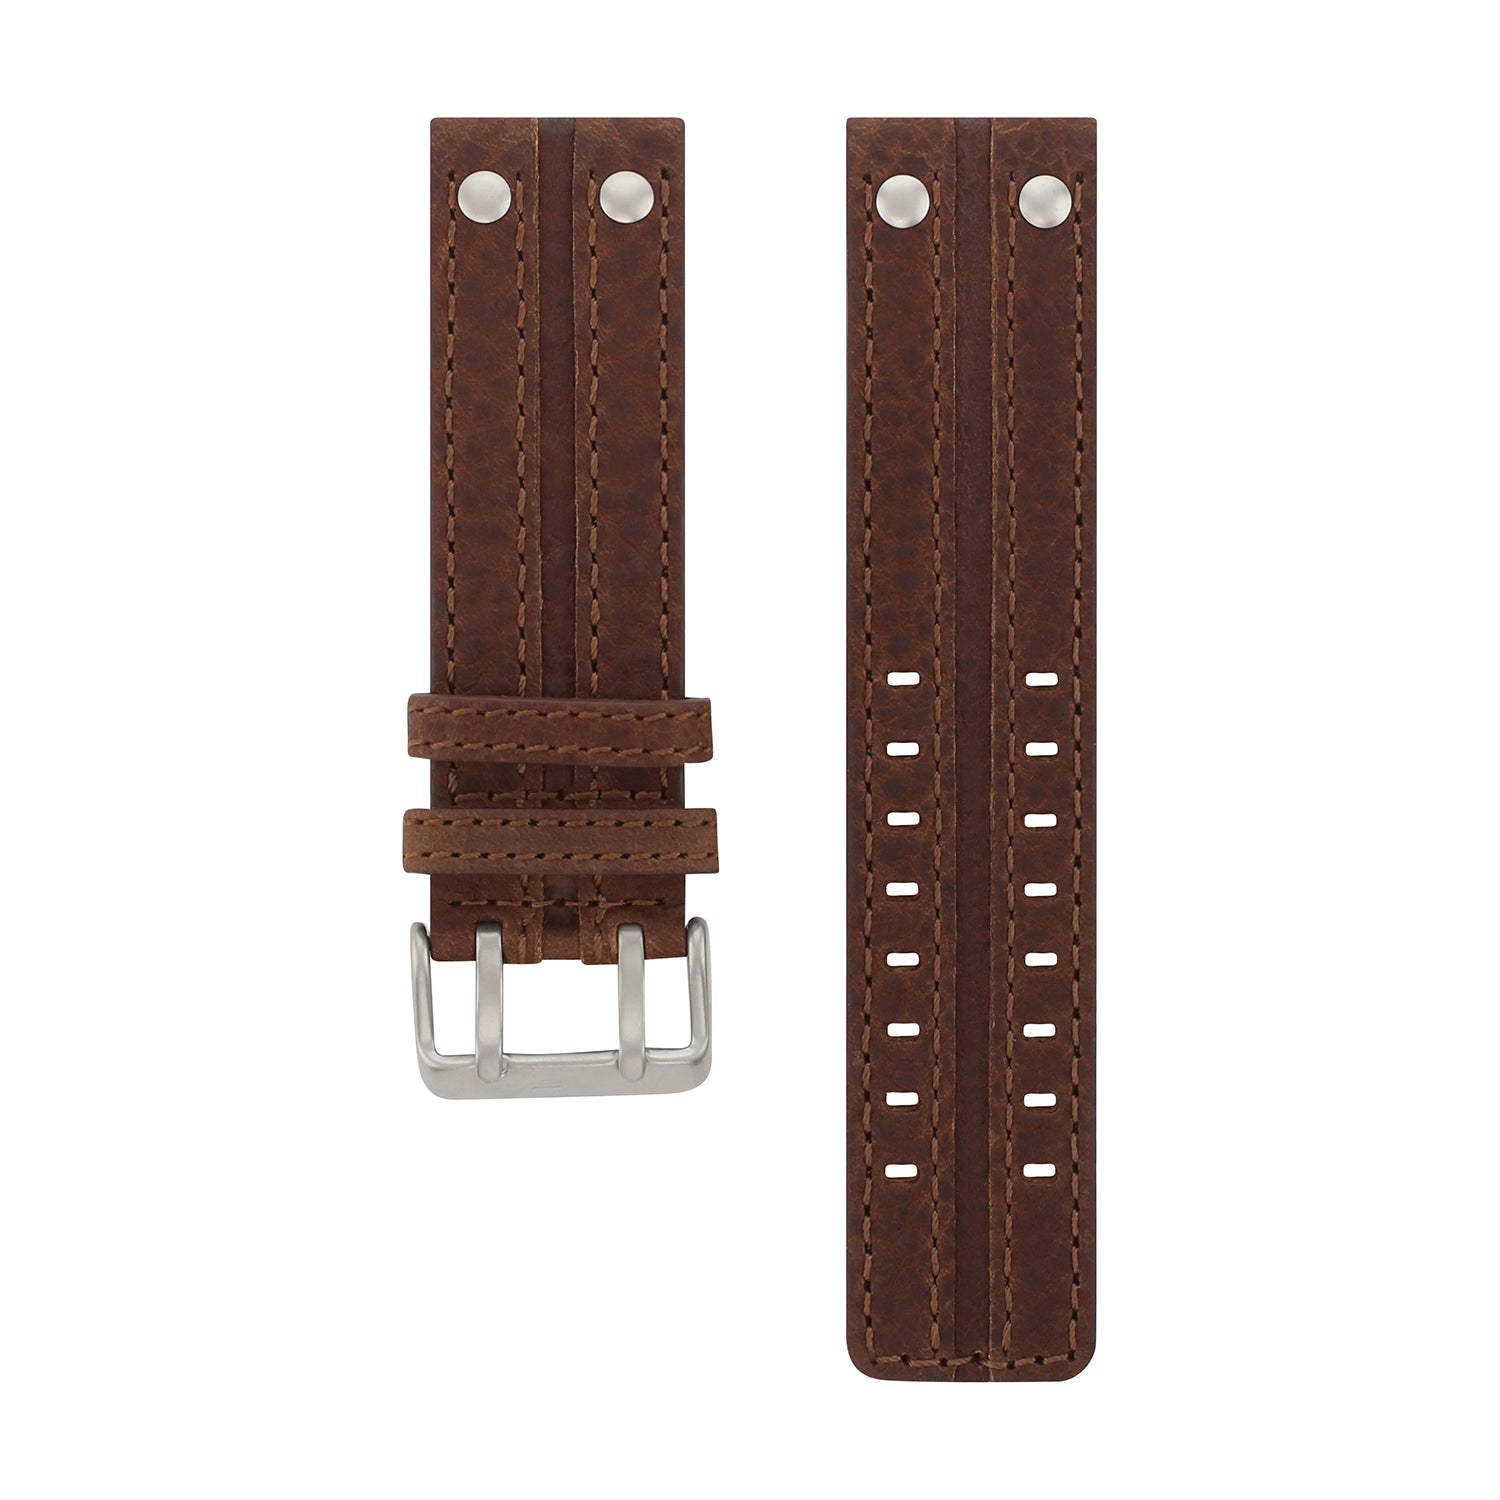 EXPEDITION BROWN LEATHER STRAP 24mm - MATT BUCKLE